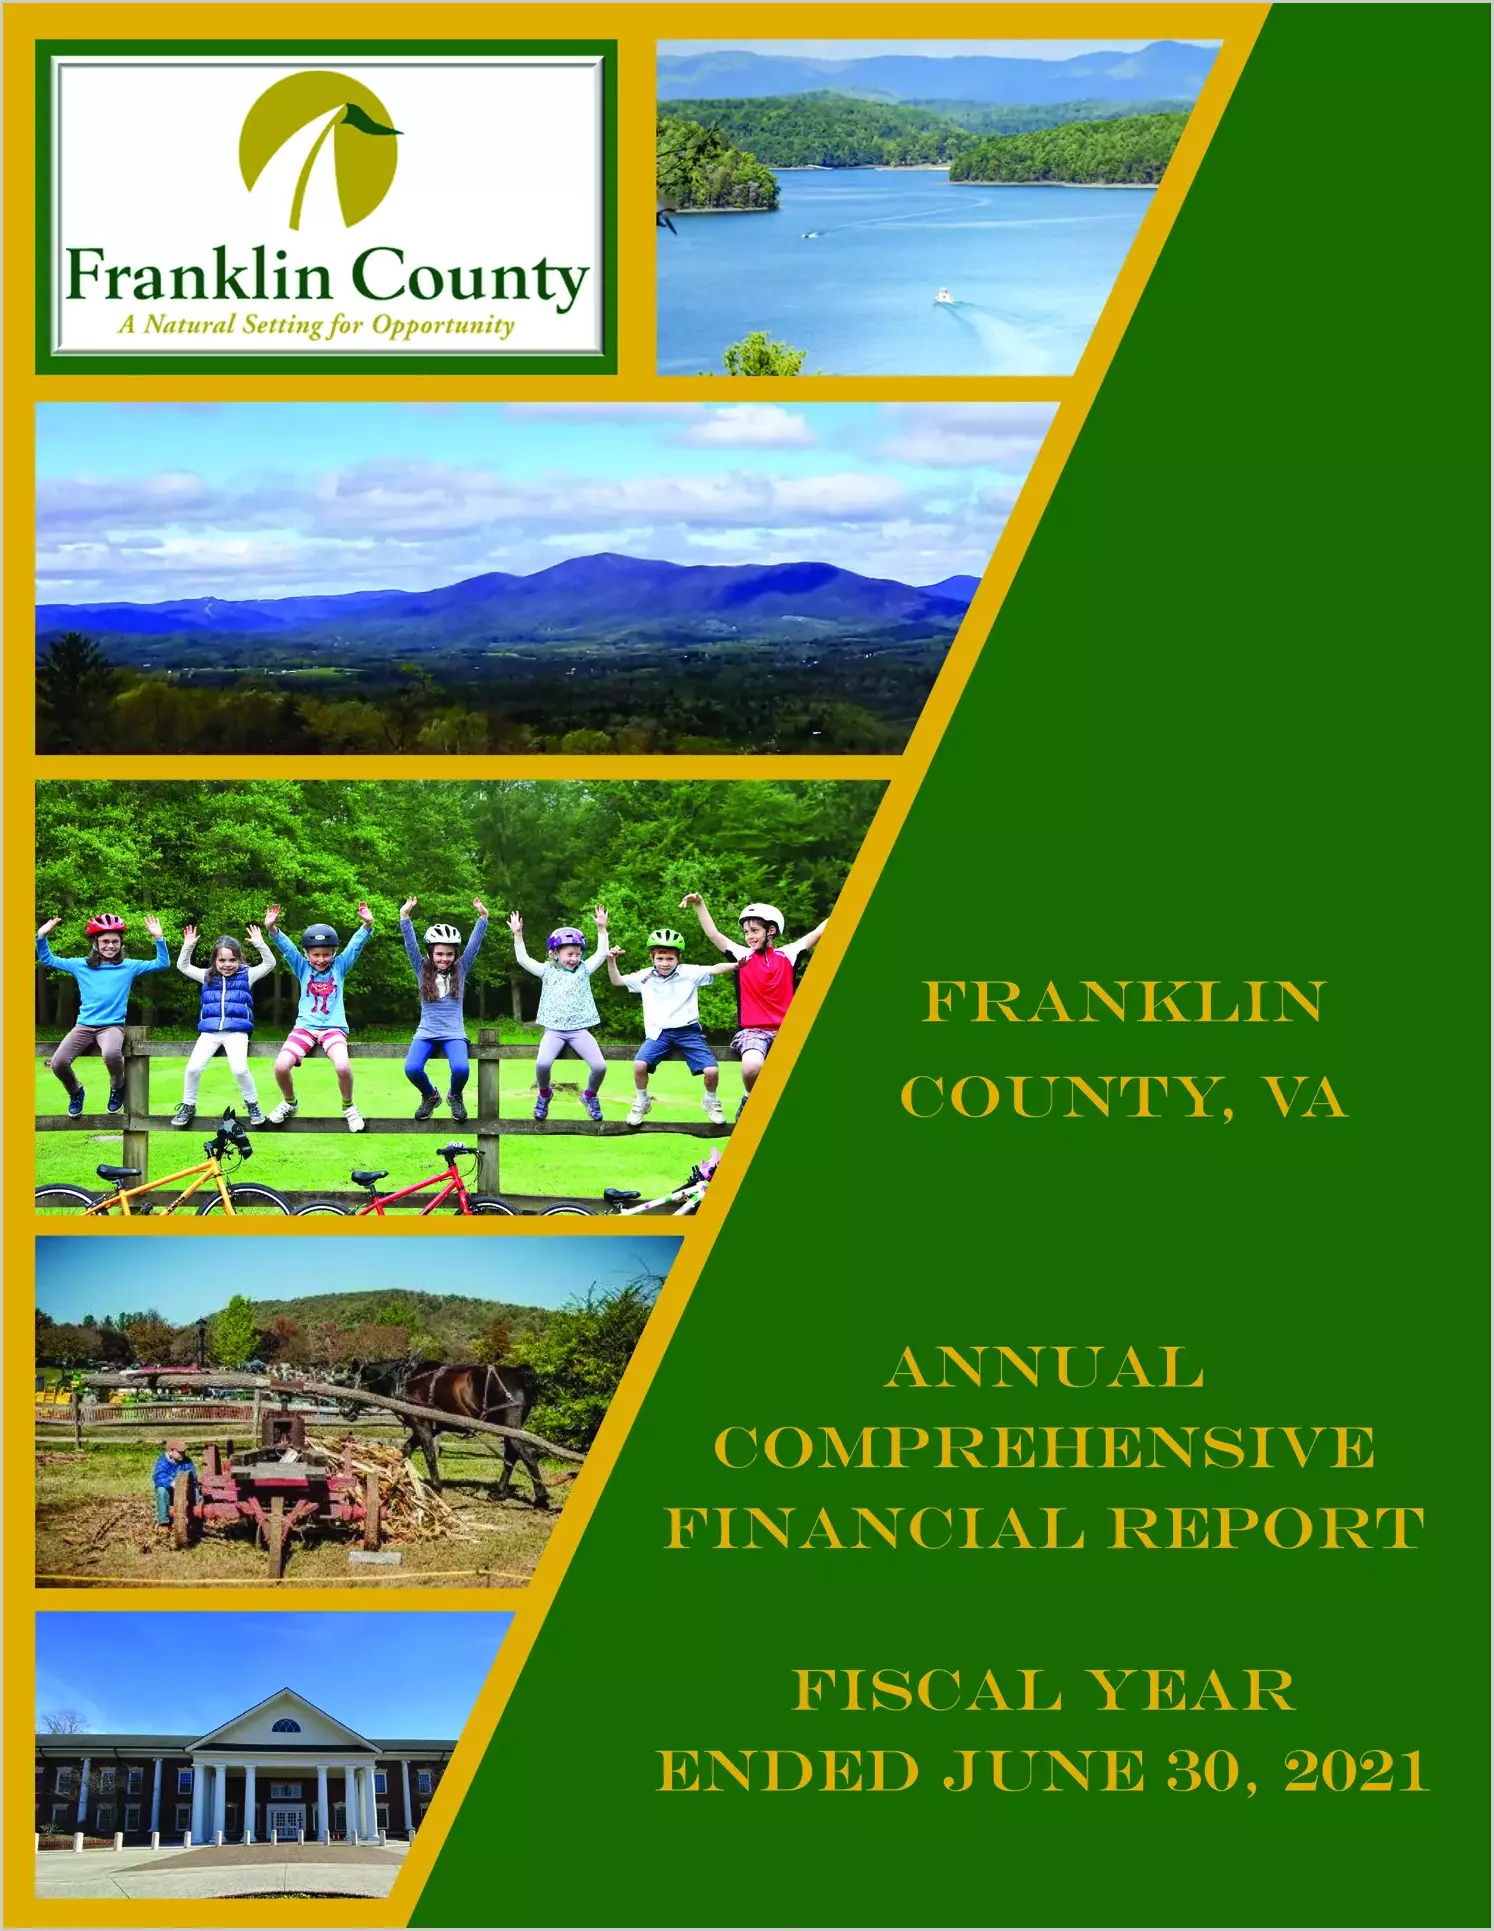 2021 Annual Financial Report for County of Franklin